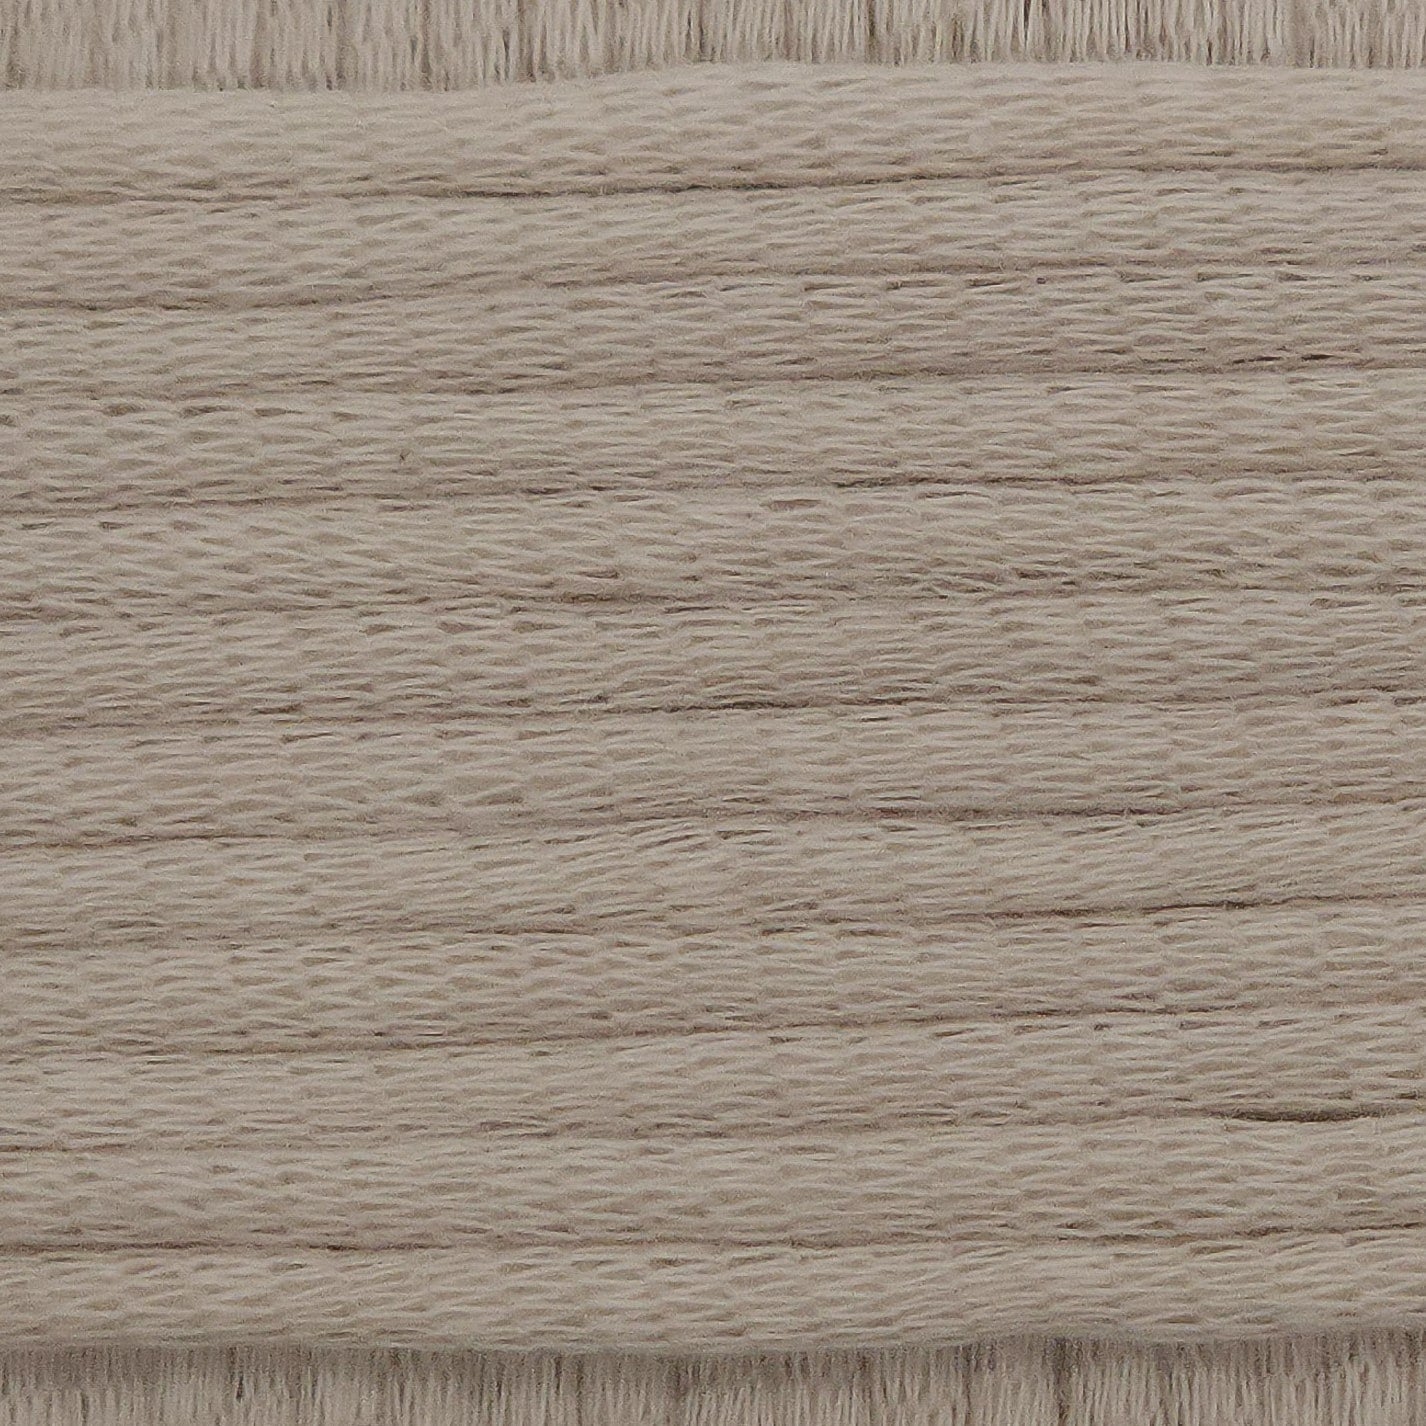 A close-up image showing the texture of an almond nude coloured yarn that is friendly for crochet beginners.